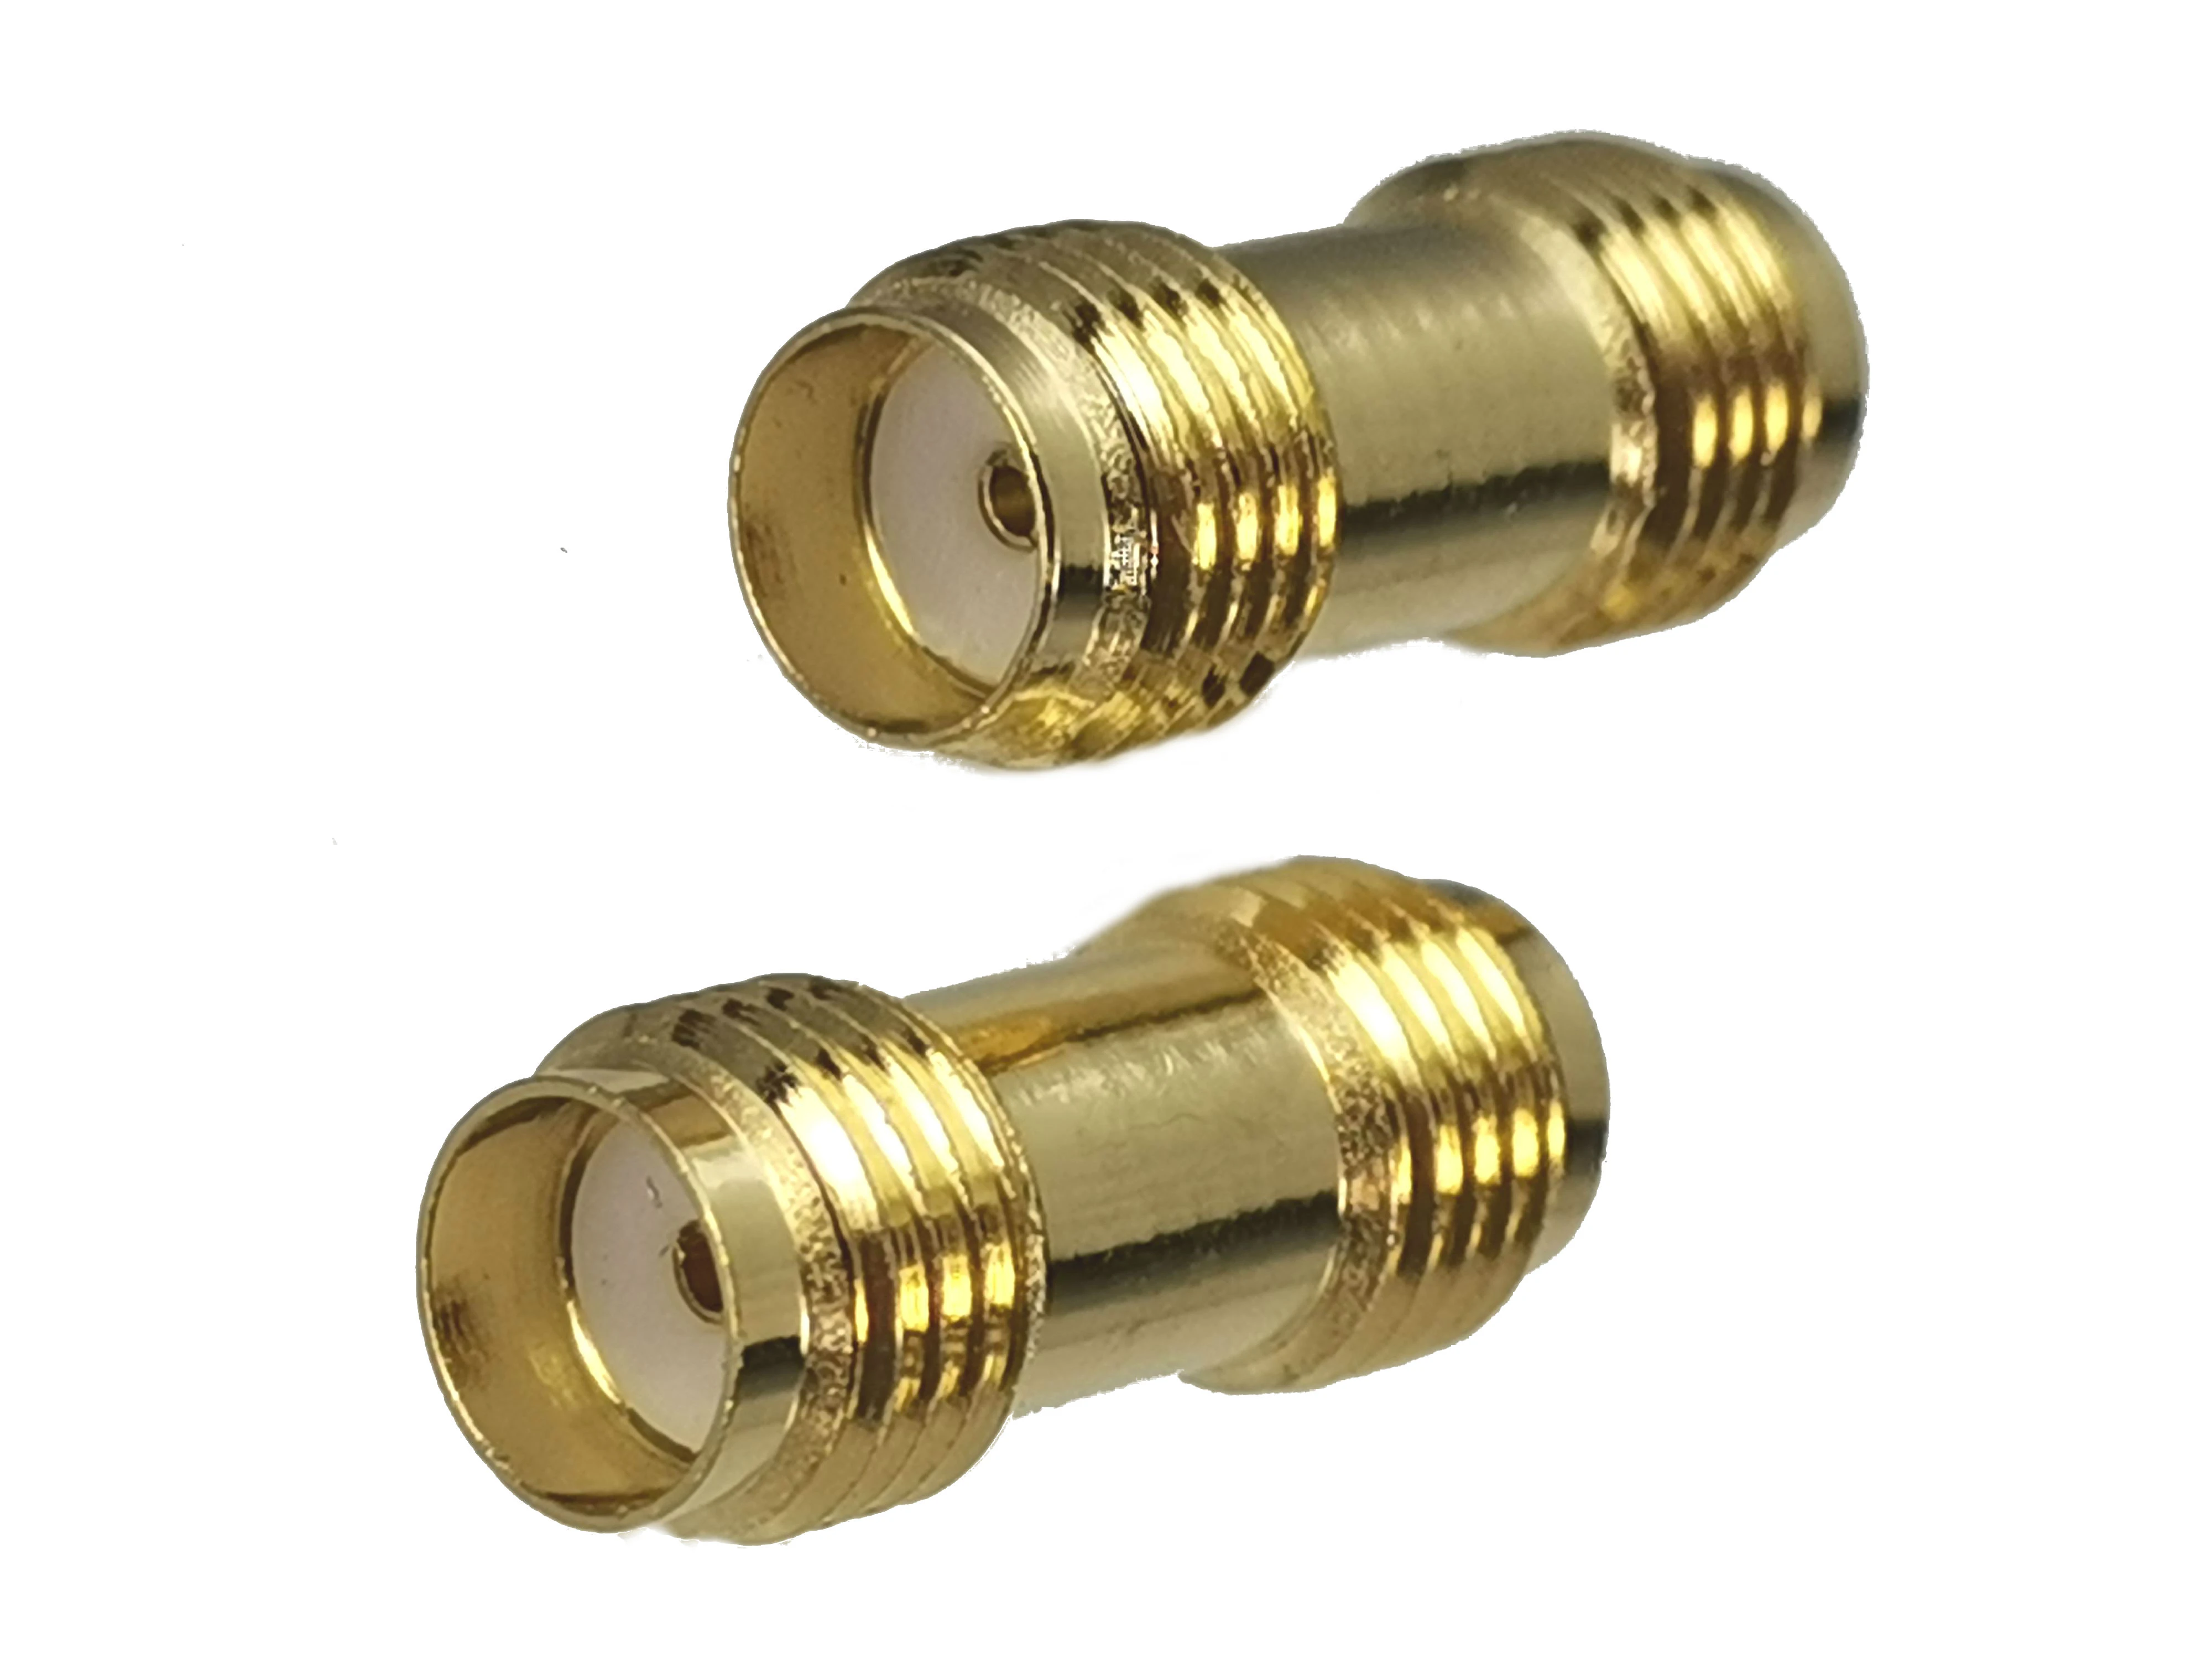 battery disconnect switch 1pcs Connector Adapter SMA Female Jack to SMA Female Jack RF Coaxial Converter Straight New Brass portable gas generator